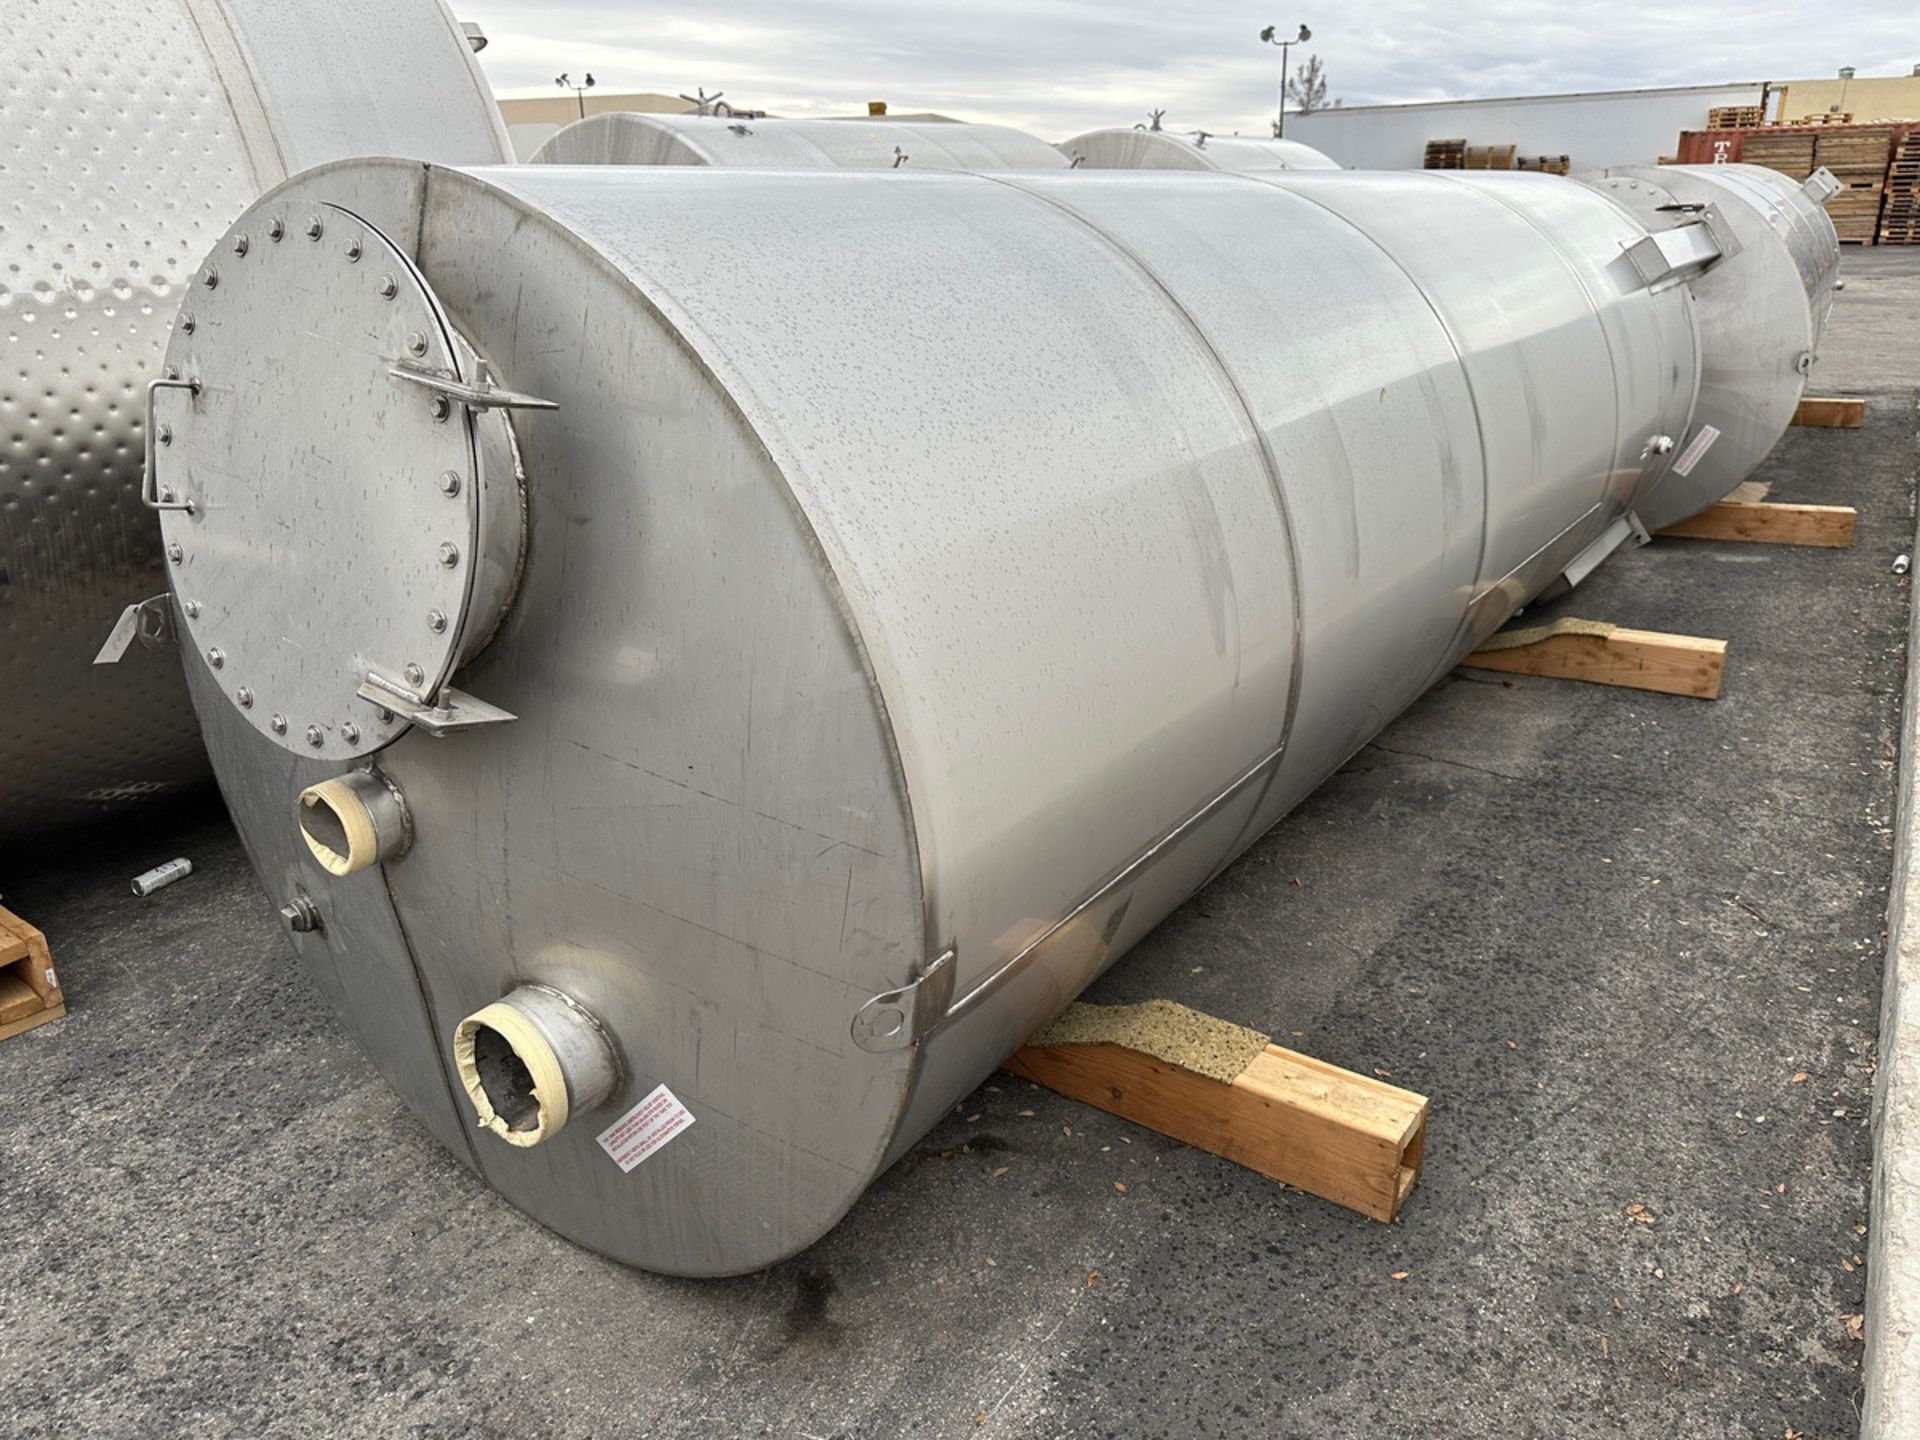 Meridian Stainless Steel Flammable Material Storage Tank, S/N 6763918, WPC Asset 405 | Rig Fee $1200 - Image 2 of 5